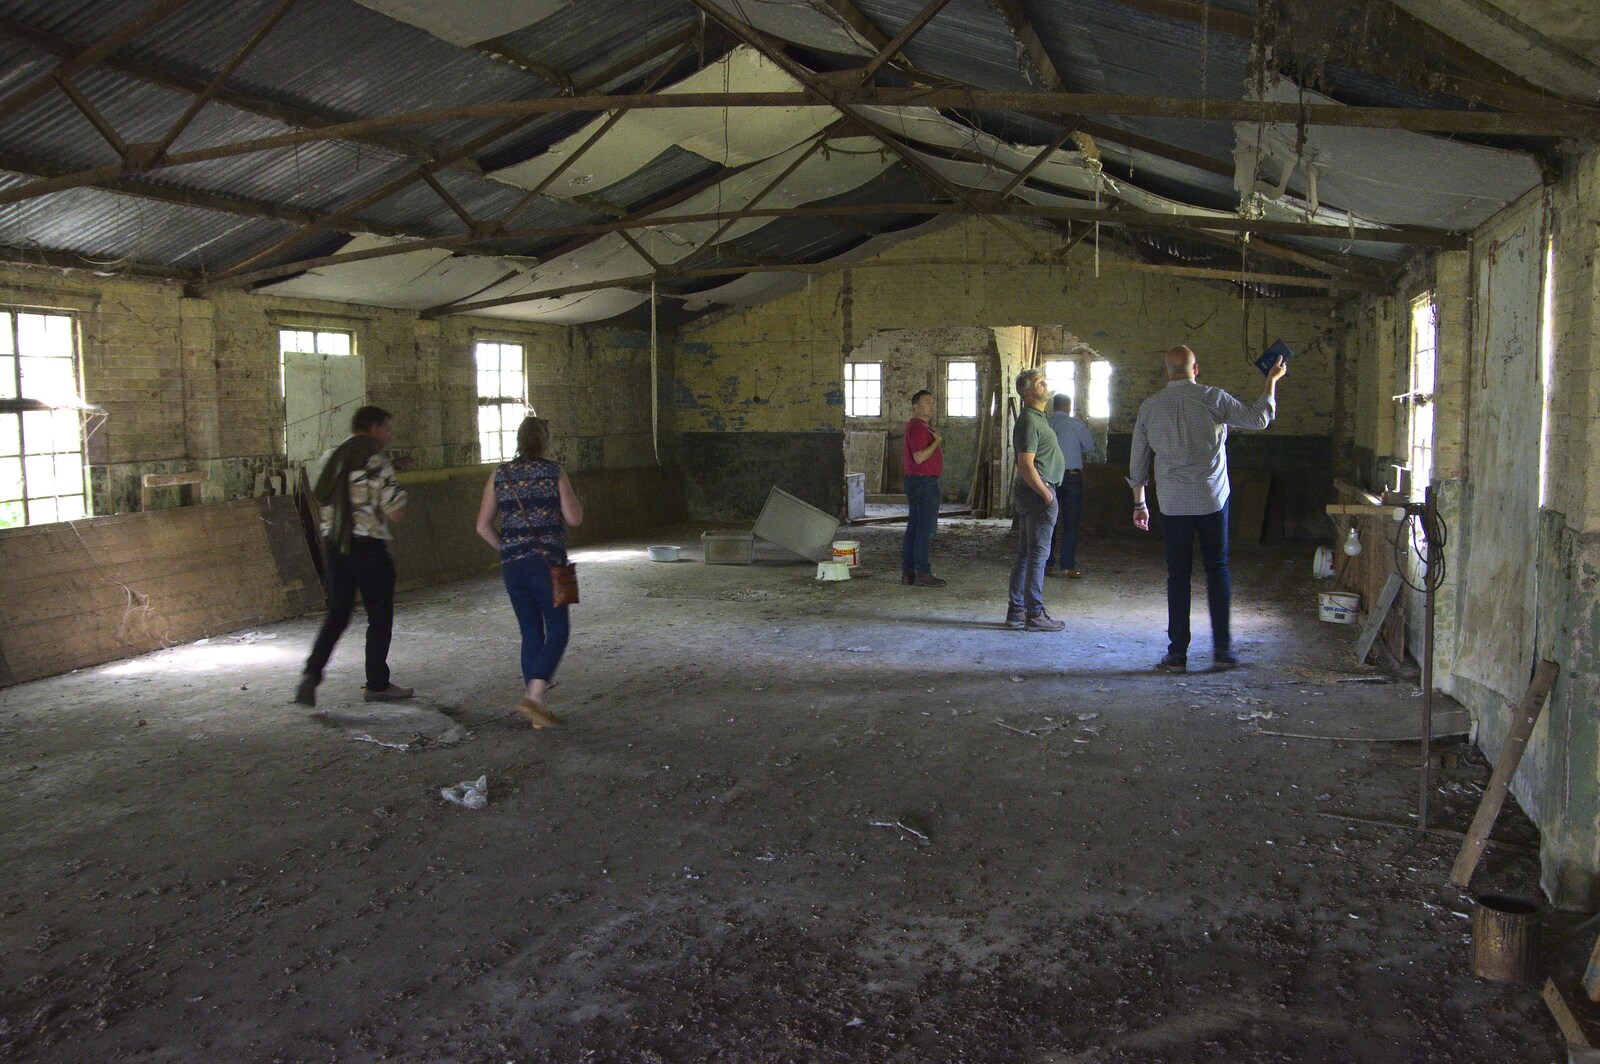 We roam around another mess/canteen hut from A 1940s Timewarp, Site 4, Bungay Airfield, Flixton, Suffolk - 9th June 2022